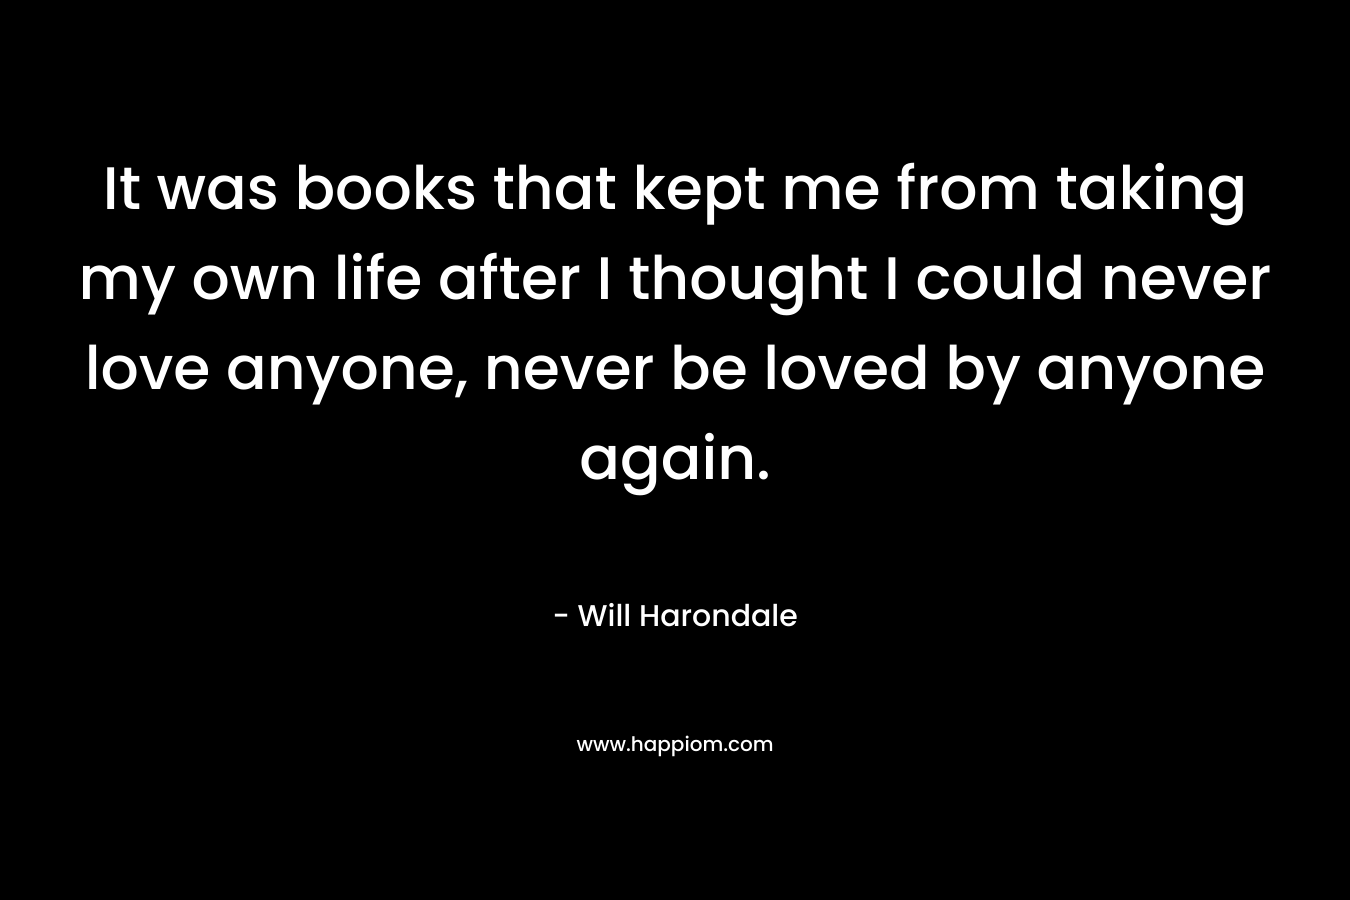 It was books that kept me from taking my own life after I thought I could never love anyone, never be loved by anyone again. – Will Harondale